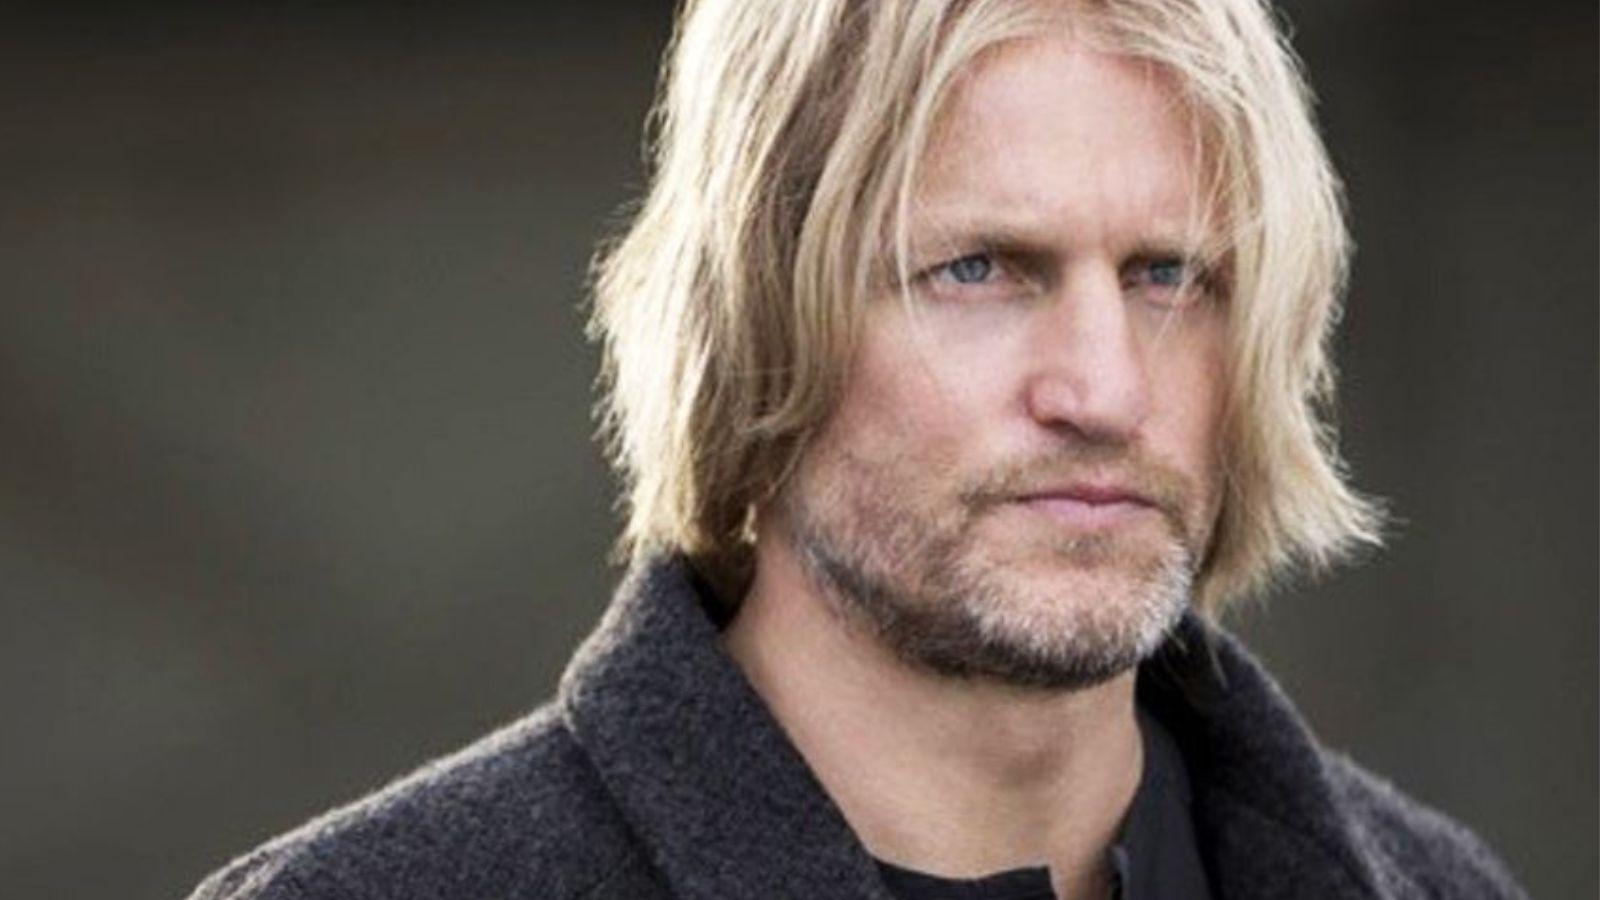 Woody Harrelson as Haymitch Abernathy in The Hunger Games Catching Fire